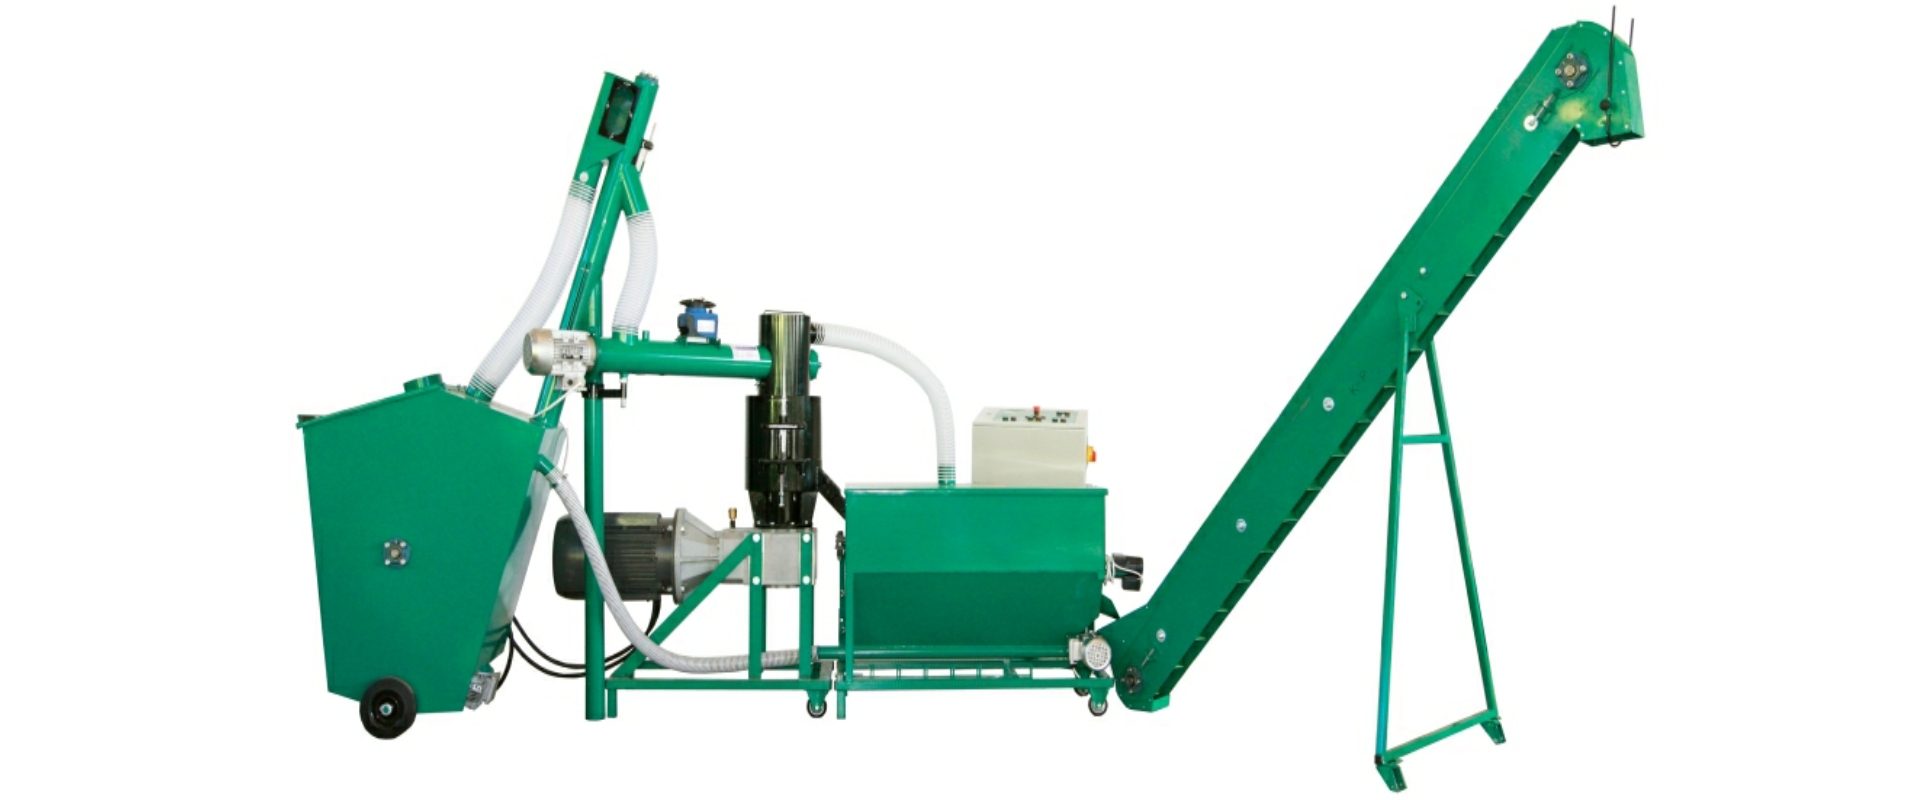 Permalink to: Pellet Mill for Sale